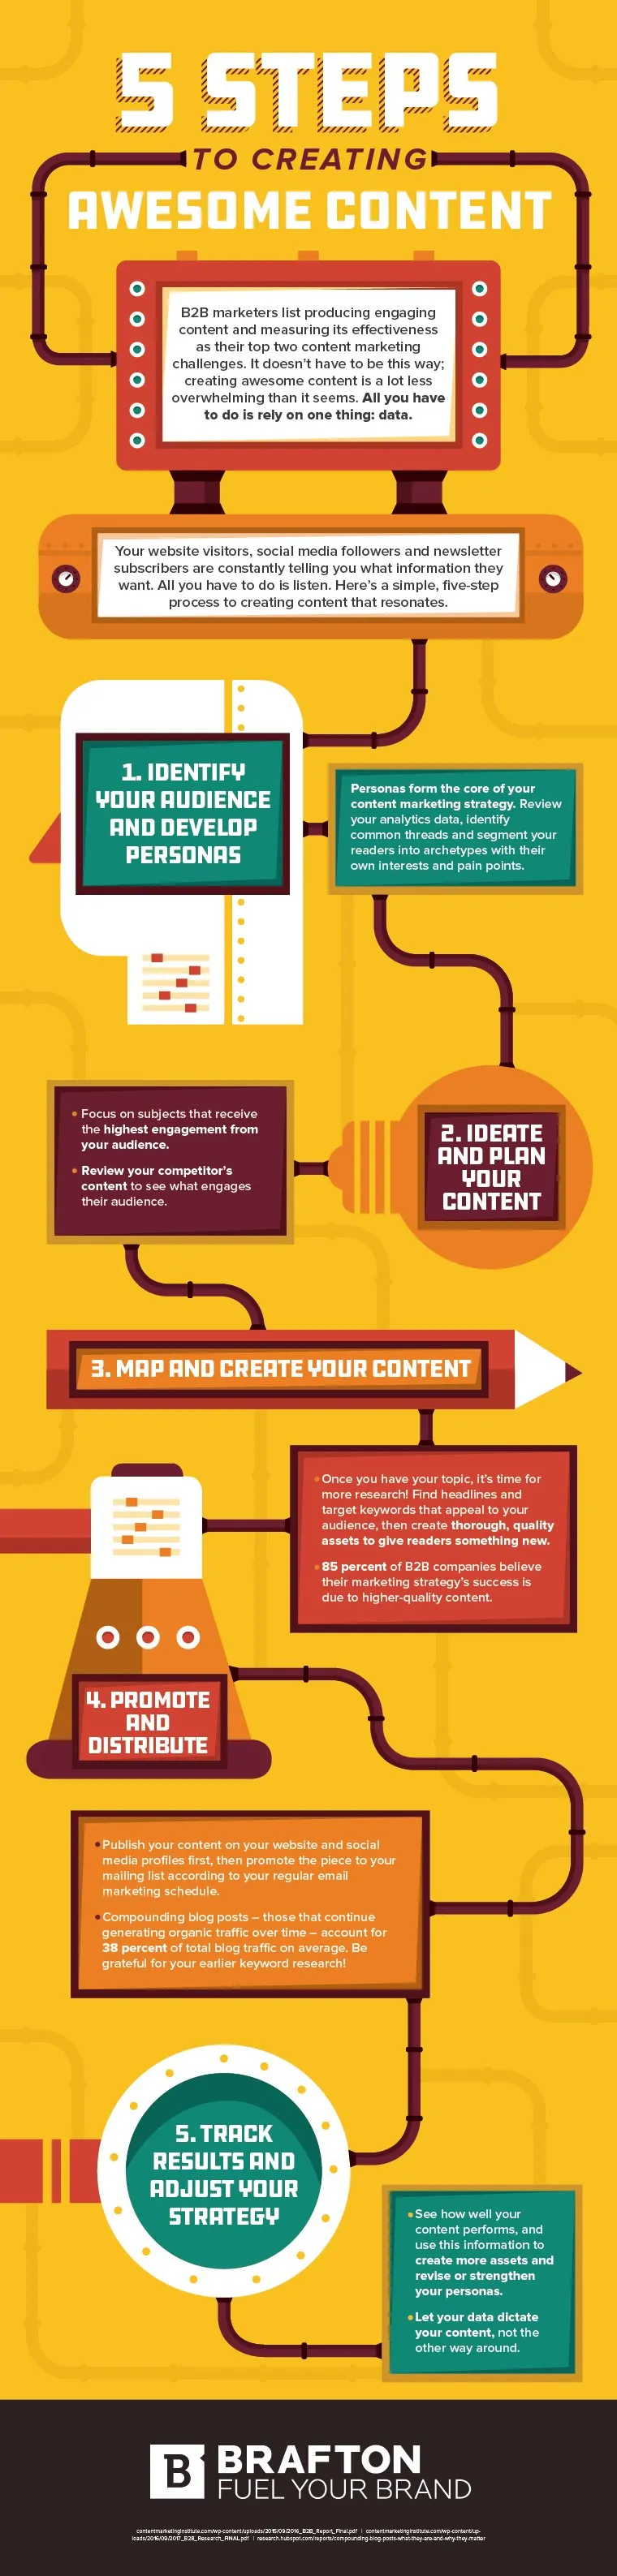 How to Create Awesome Content in 5 Easy Steps - #Infographic